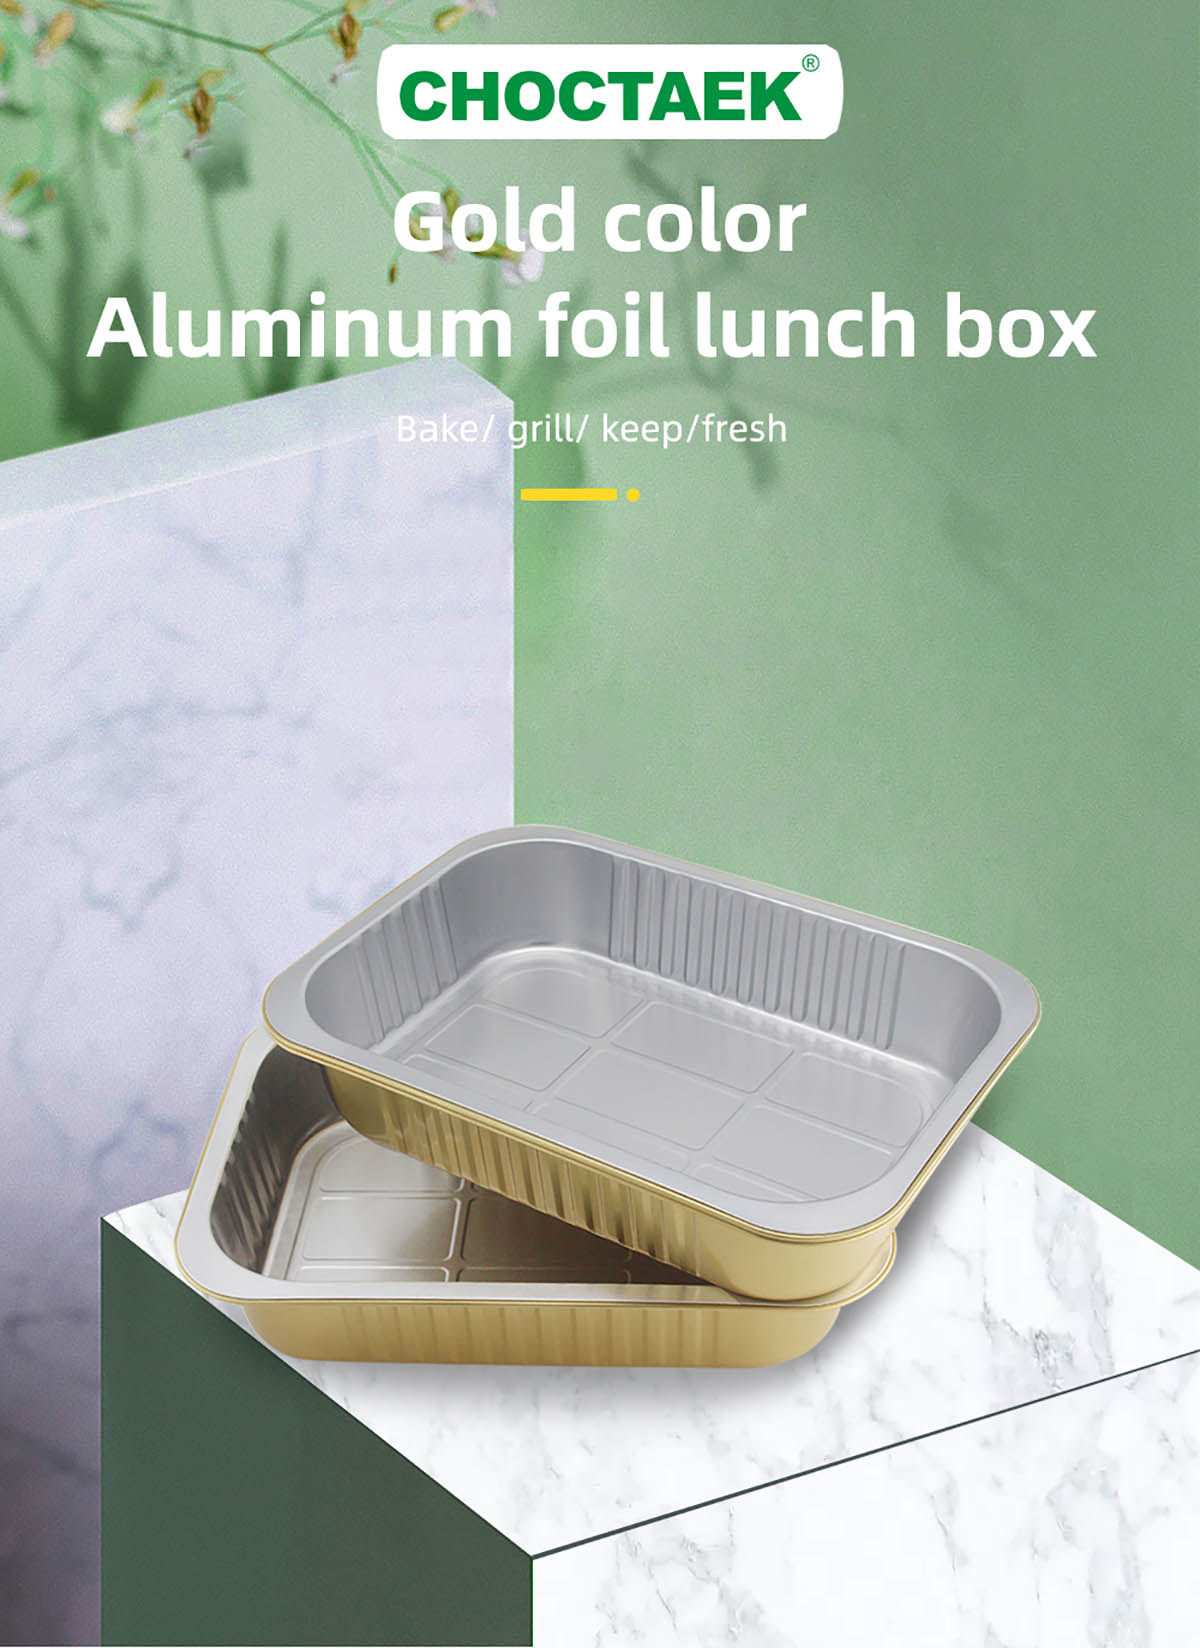 Buy Wholesale China Take Out Foil Container Aluminum Pans